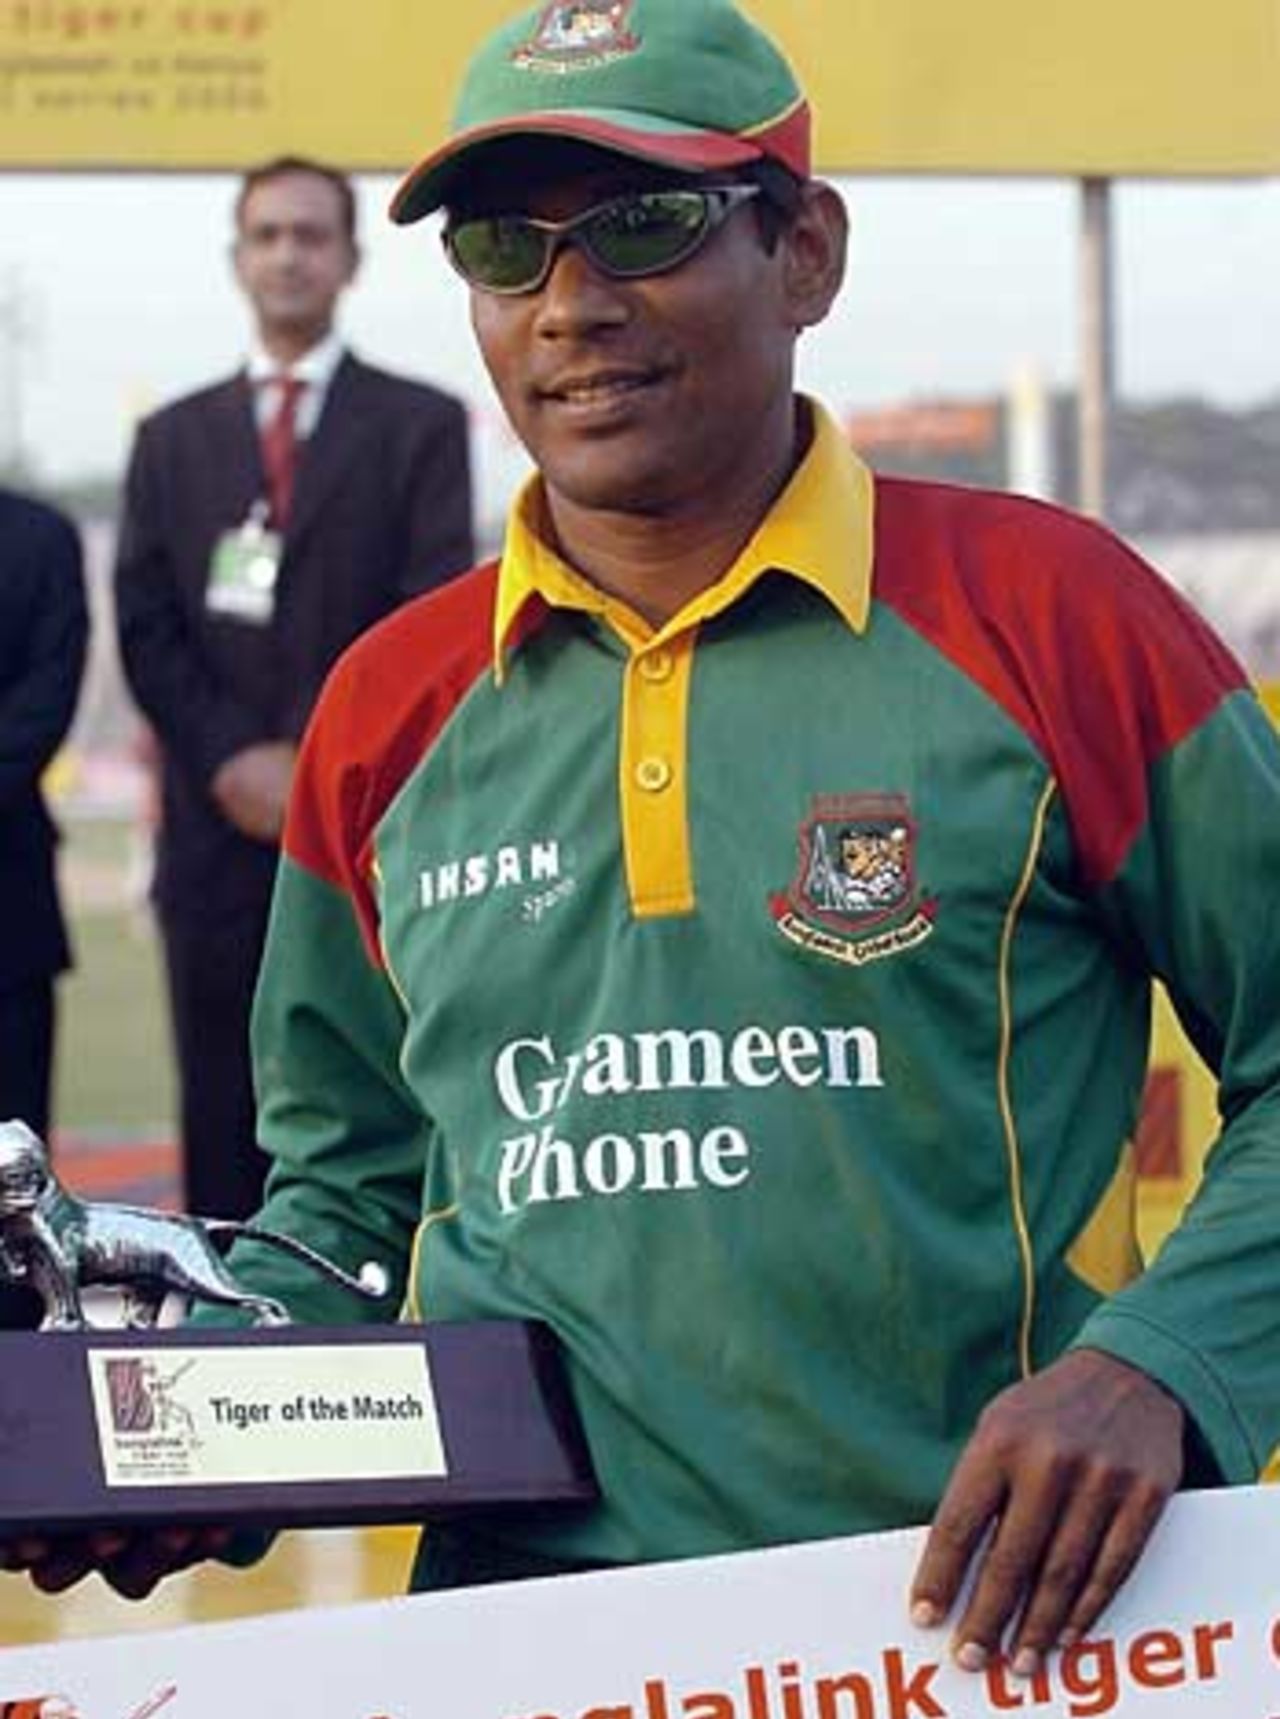 Mohammad Rafique with his Man-of-the-Match trophy ("Tiger of the Match"), Bangladesh v Kenya, 3rd ODI, Fatullah, March 23, 2006